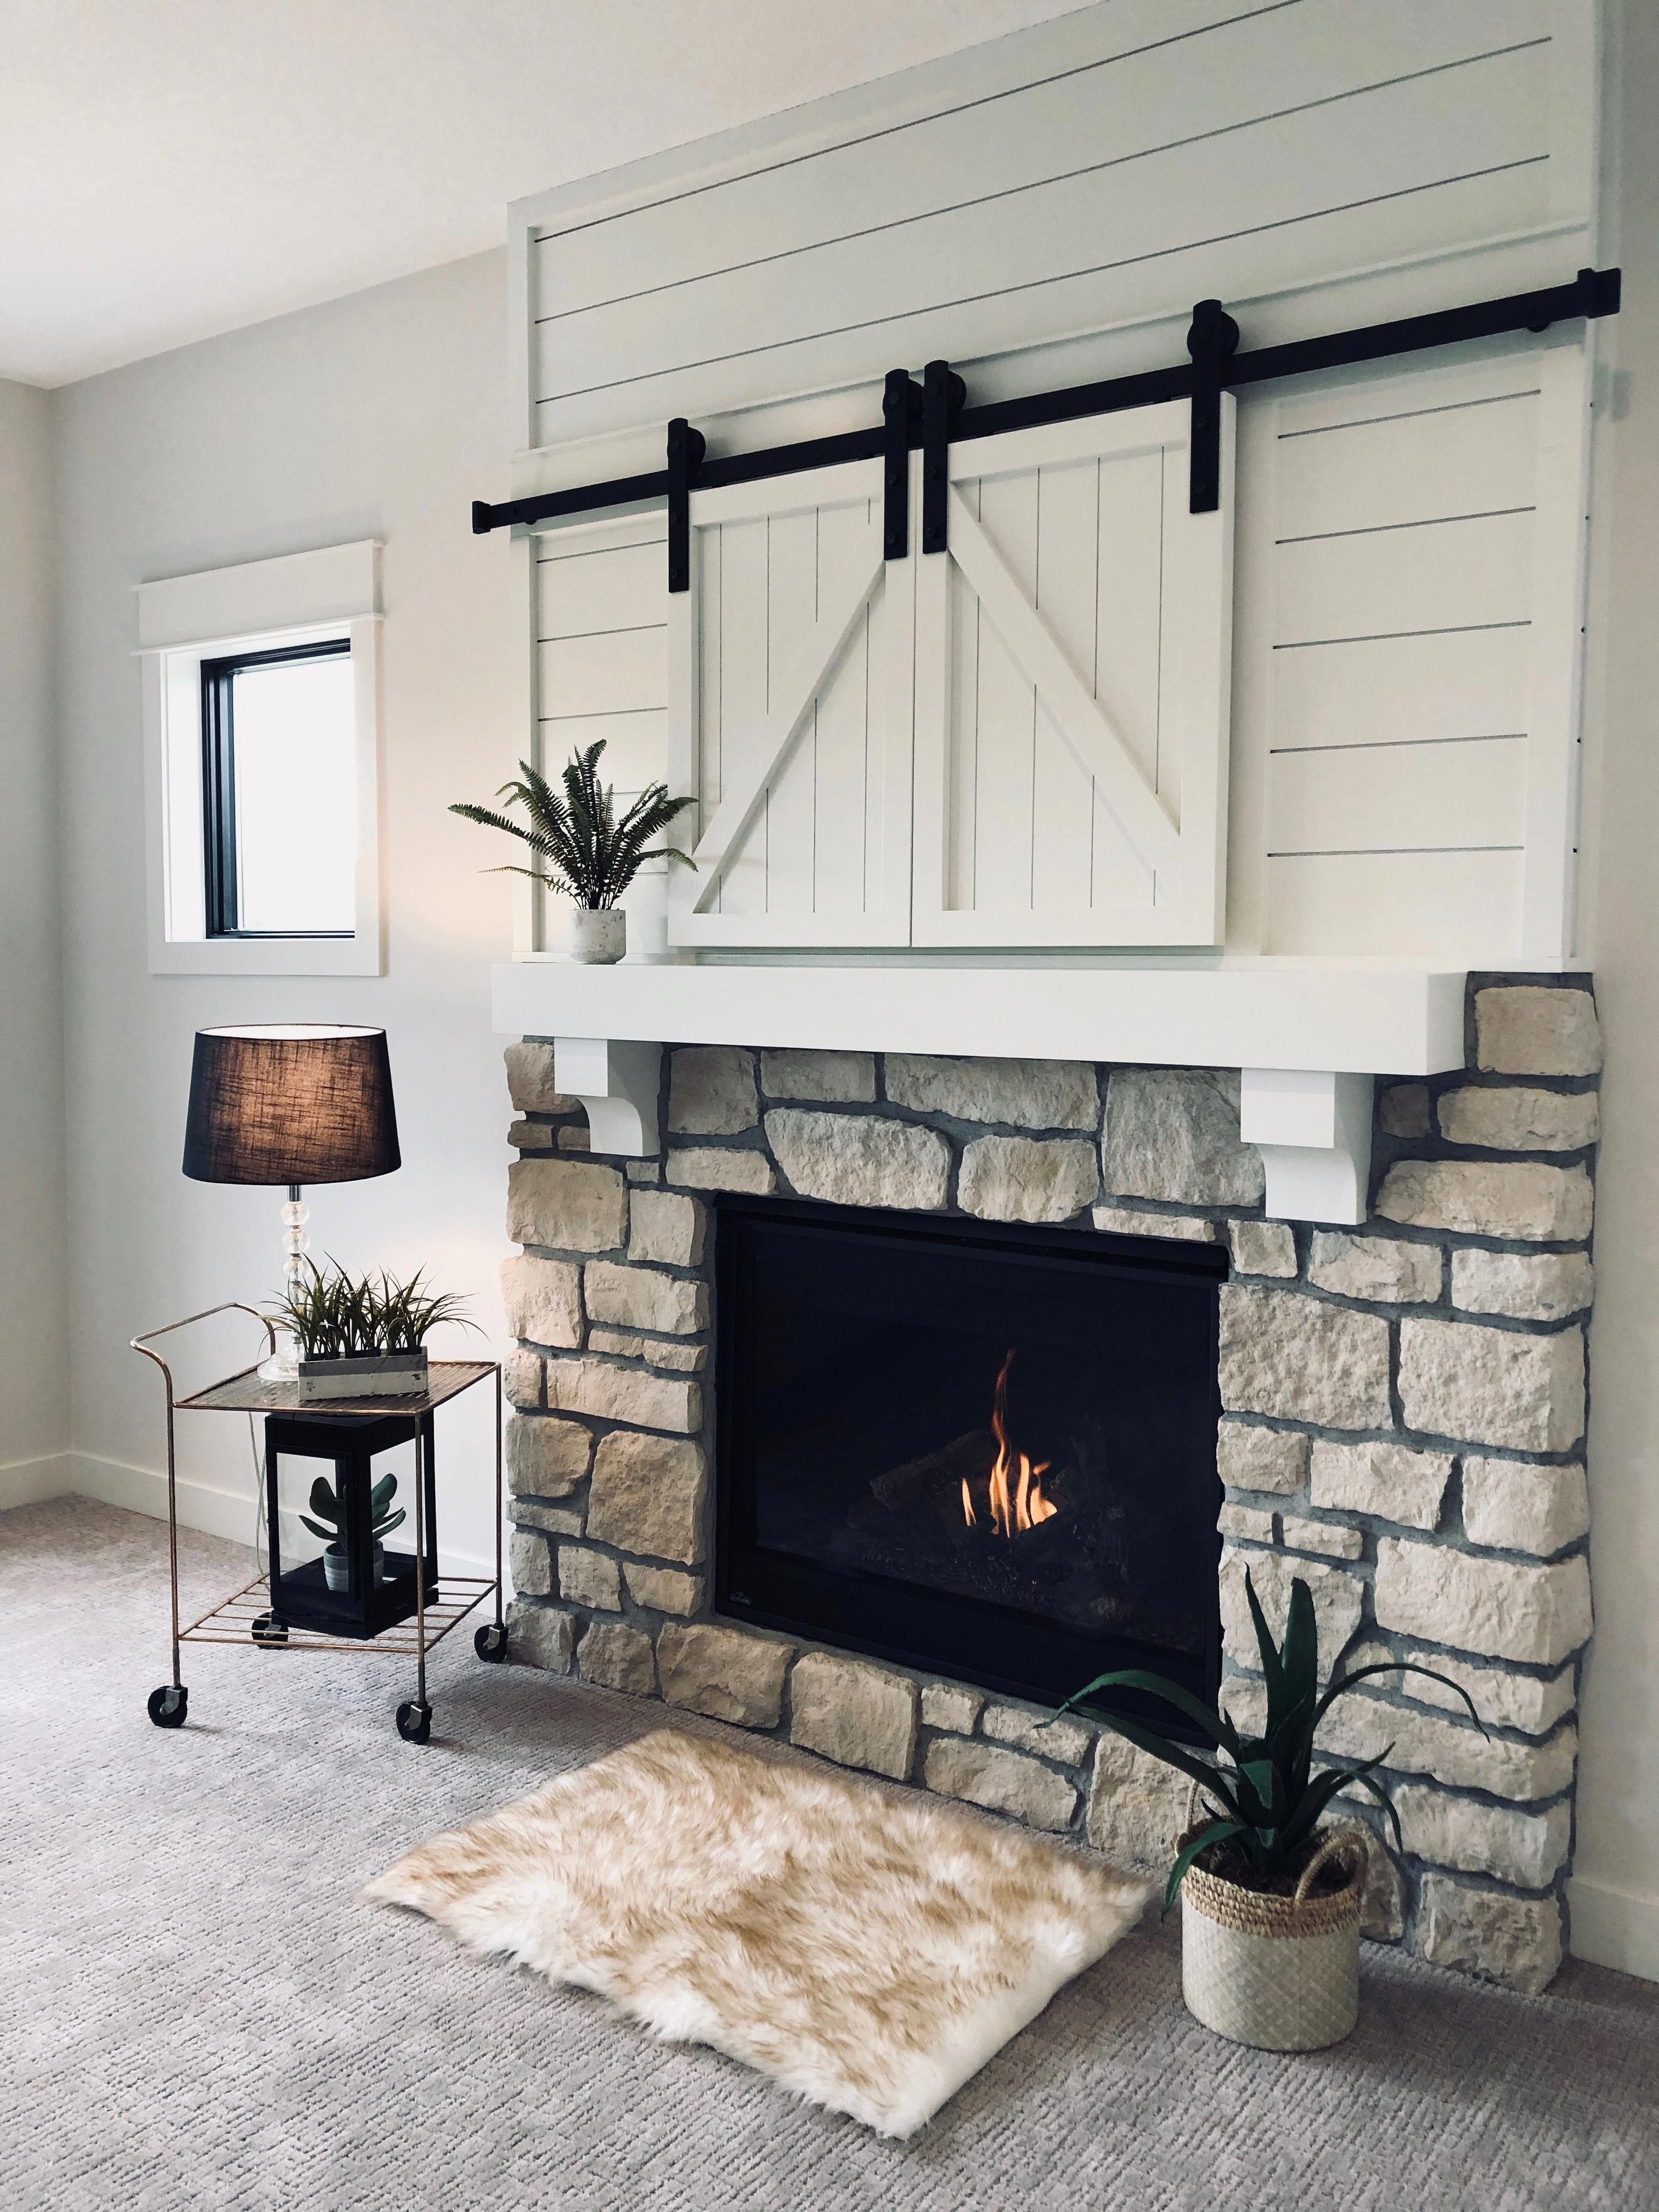 Fireplace Trim Kit Awesome White Painted Shiplap On A Fireplace with Secret Tv Storage